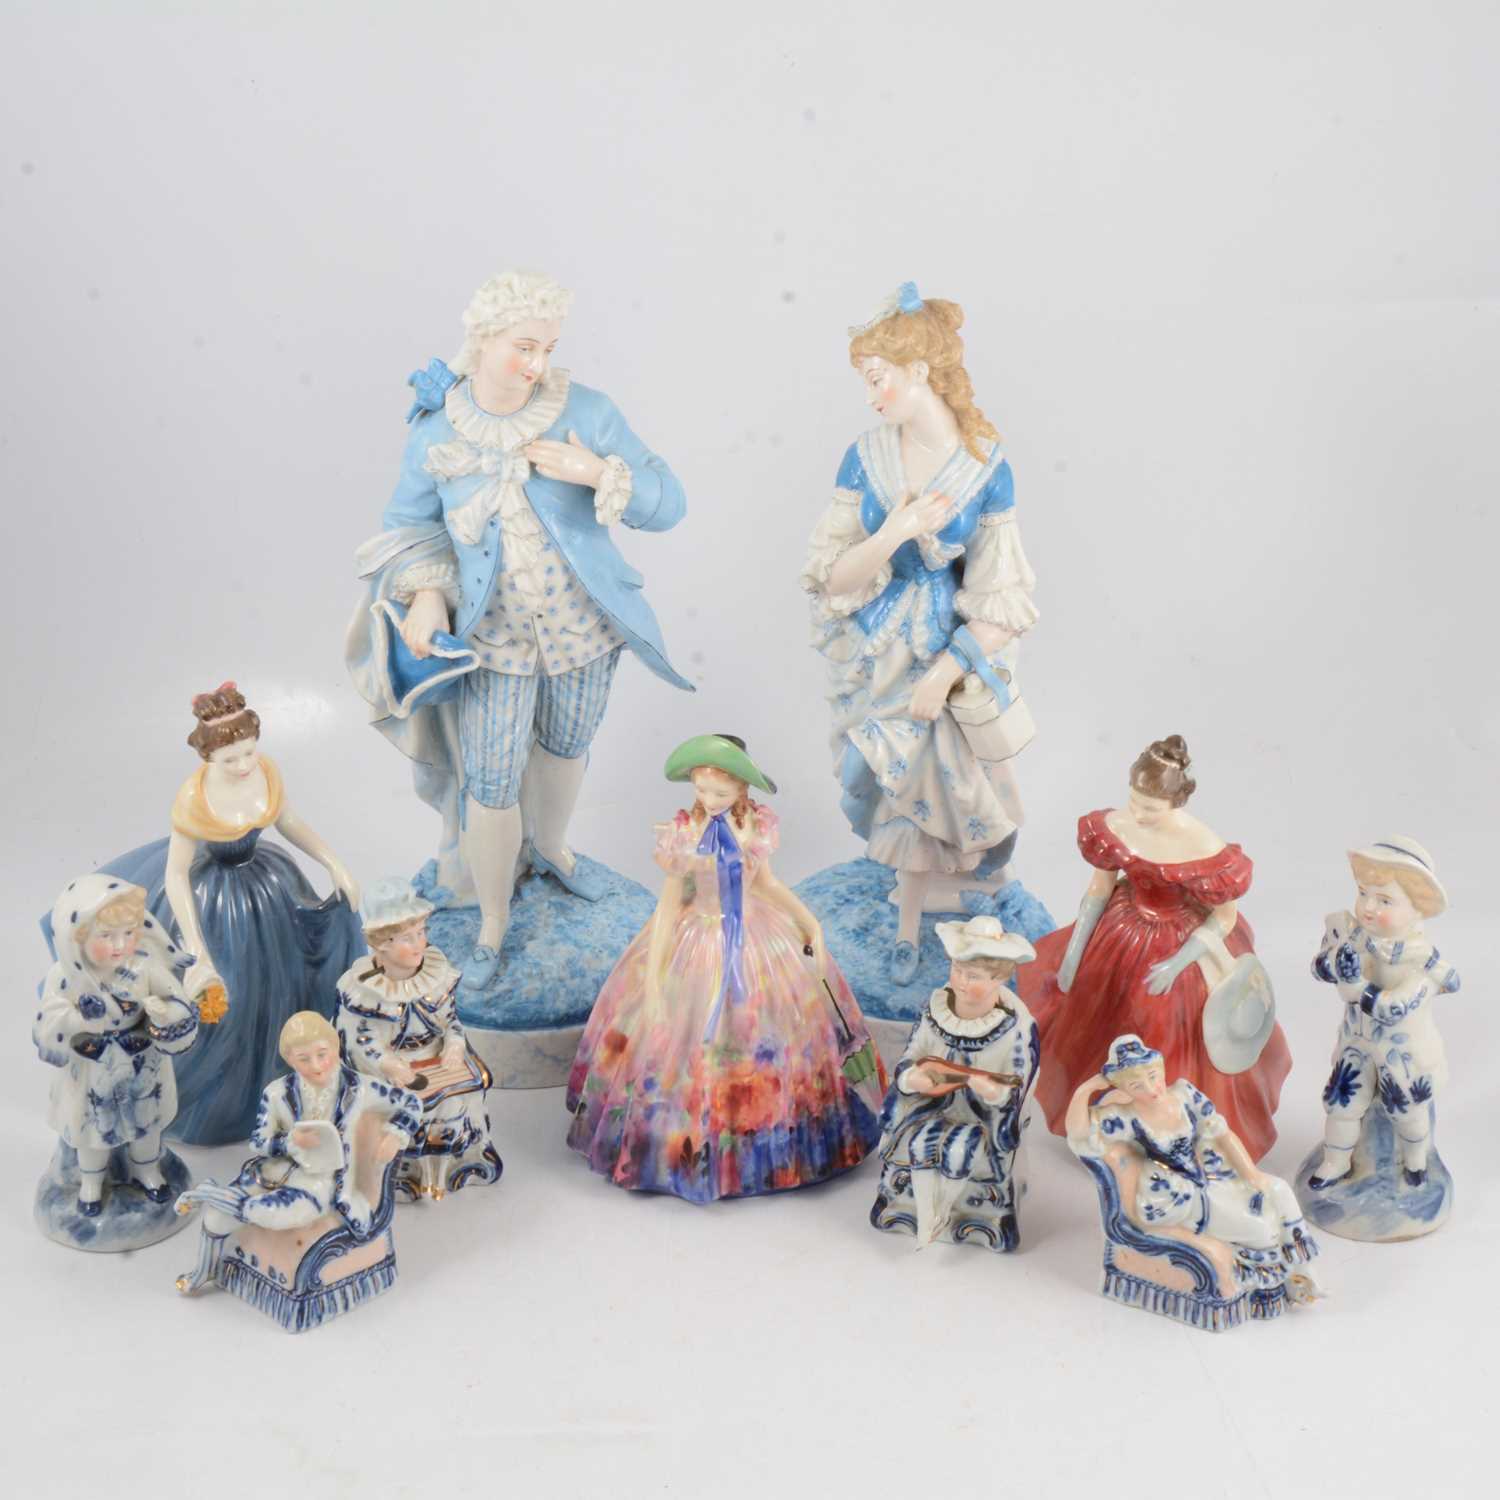 Lot 71 - Pair of French porcelain figures and a collection of figurines